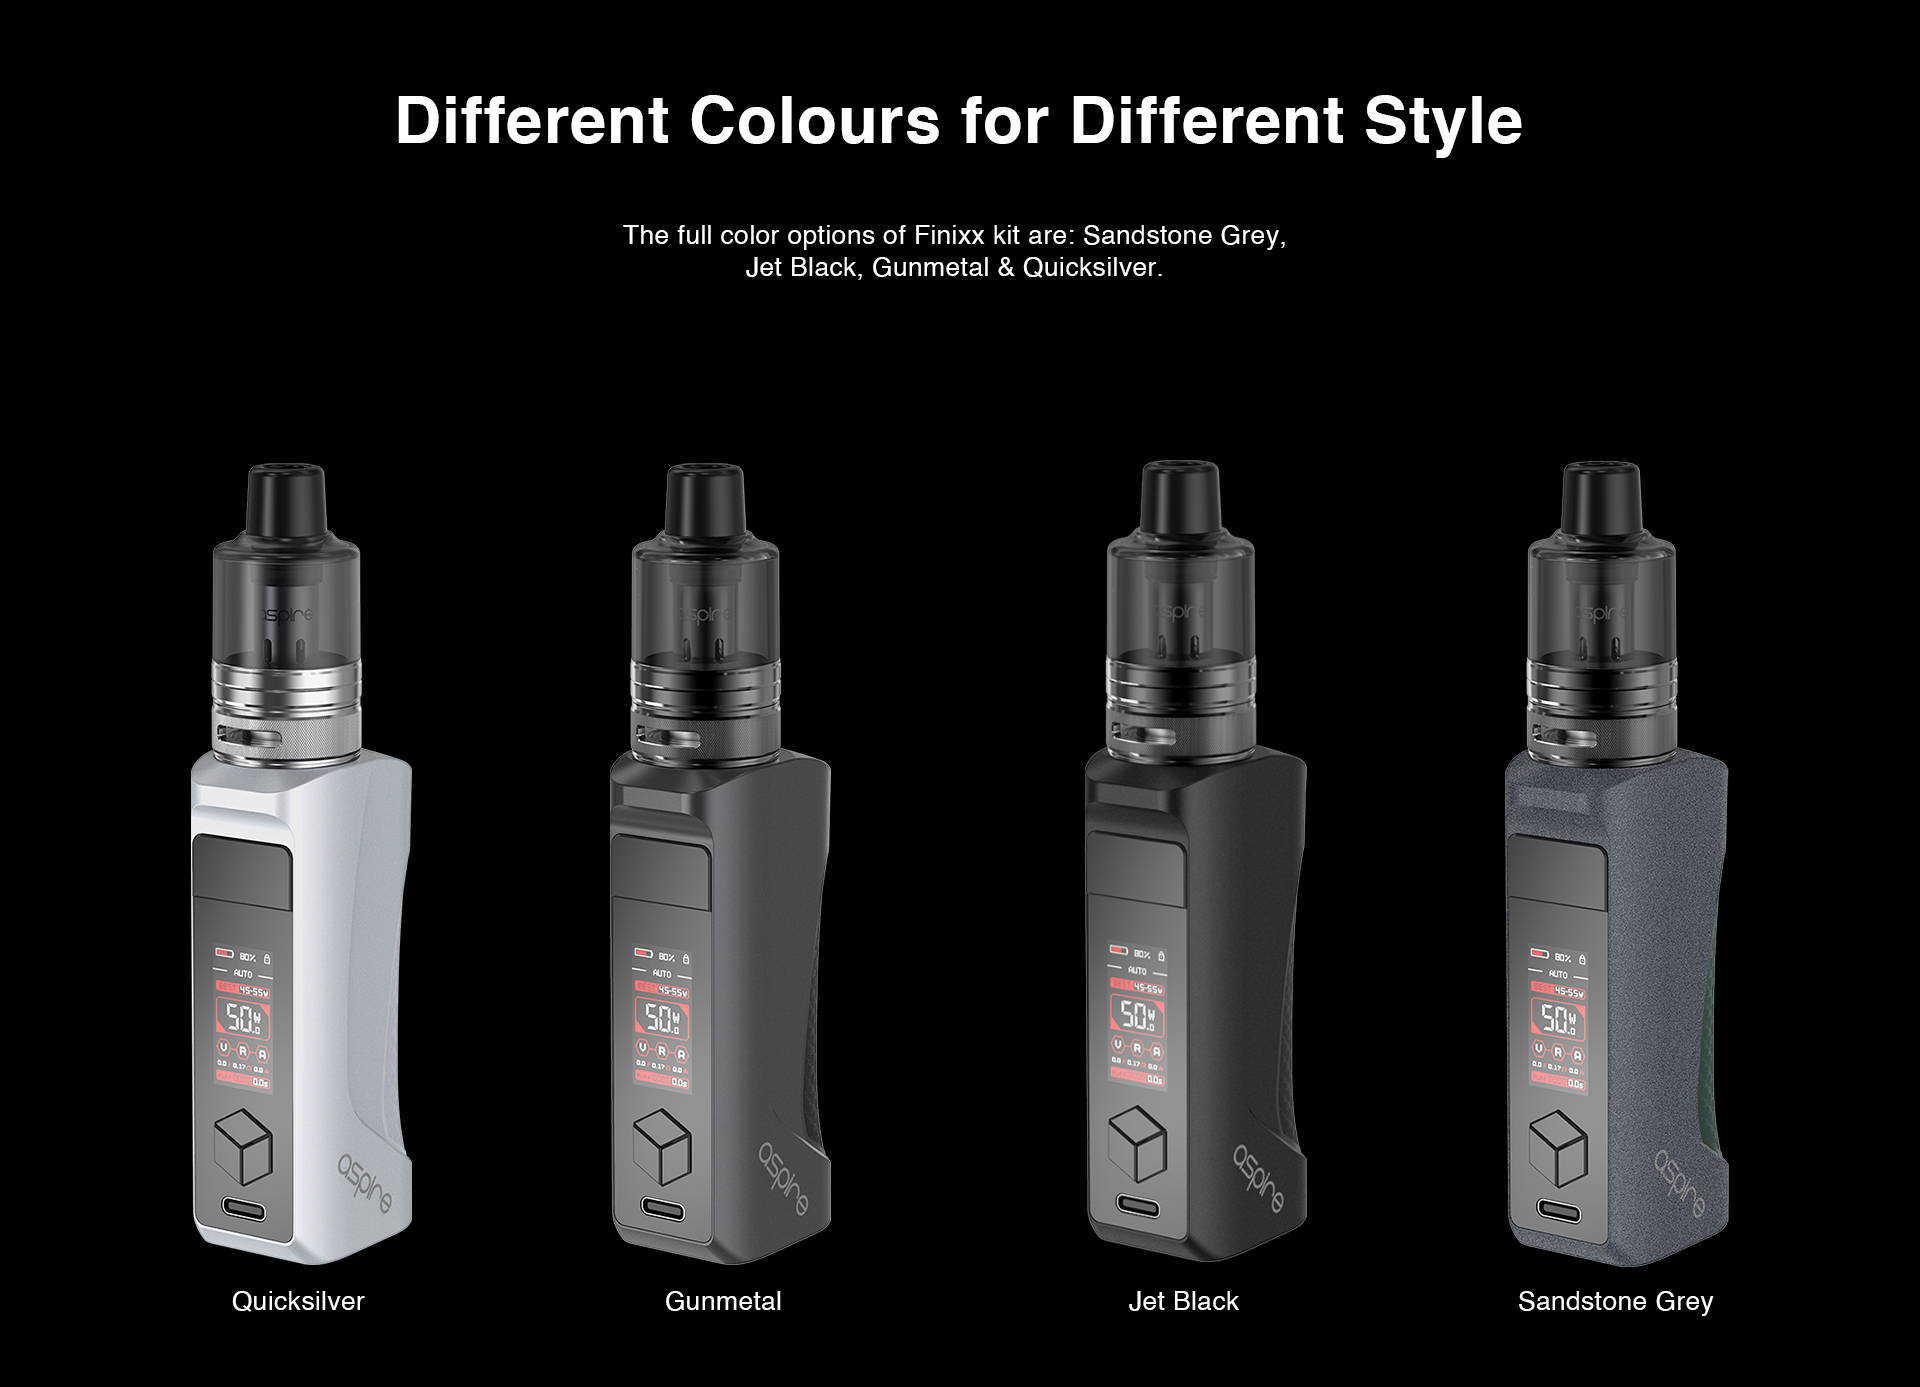 The full color options of Finixx kit are: Sandstone Grey, Jet Black, Gunmetal, Quicksilver, Black Sparks, and Mystery Black.